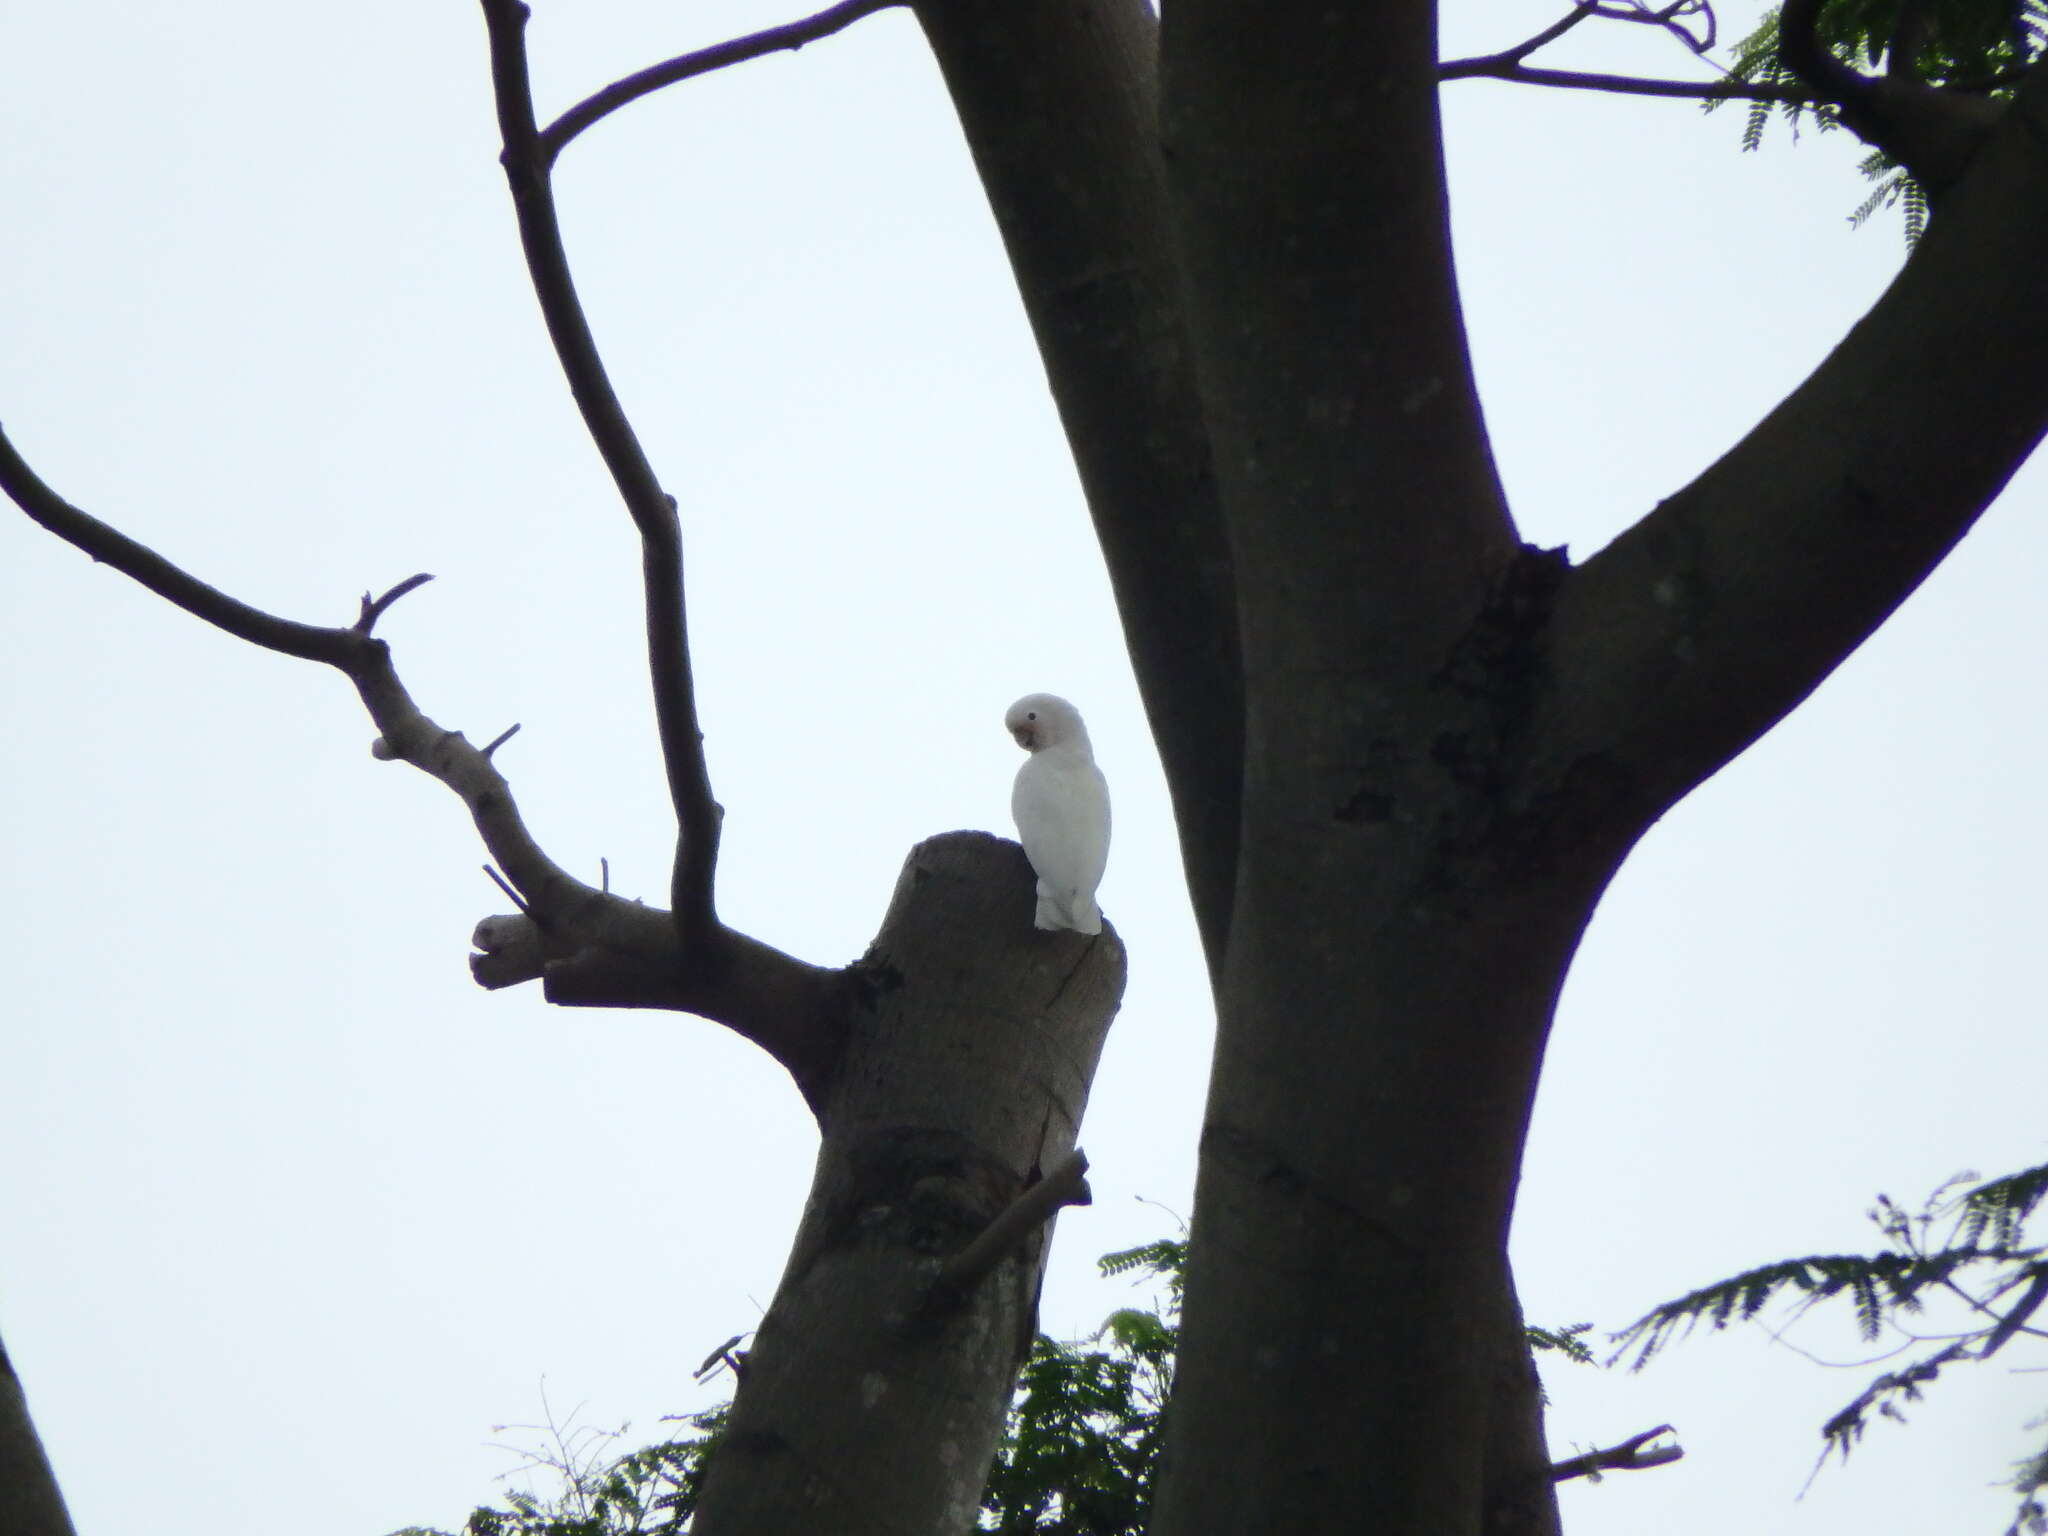 Image of Goffin's Cockatoo